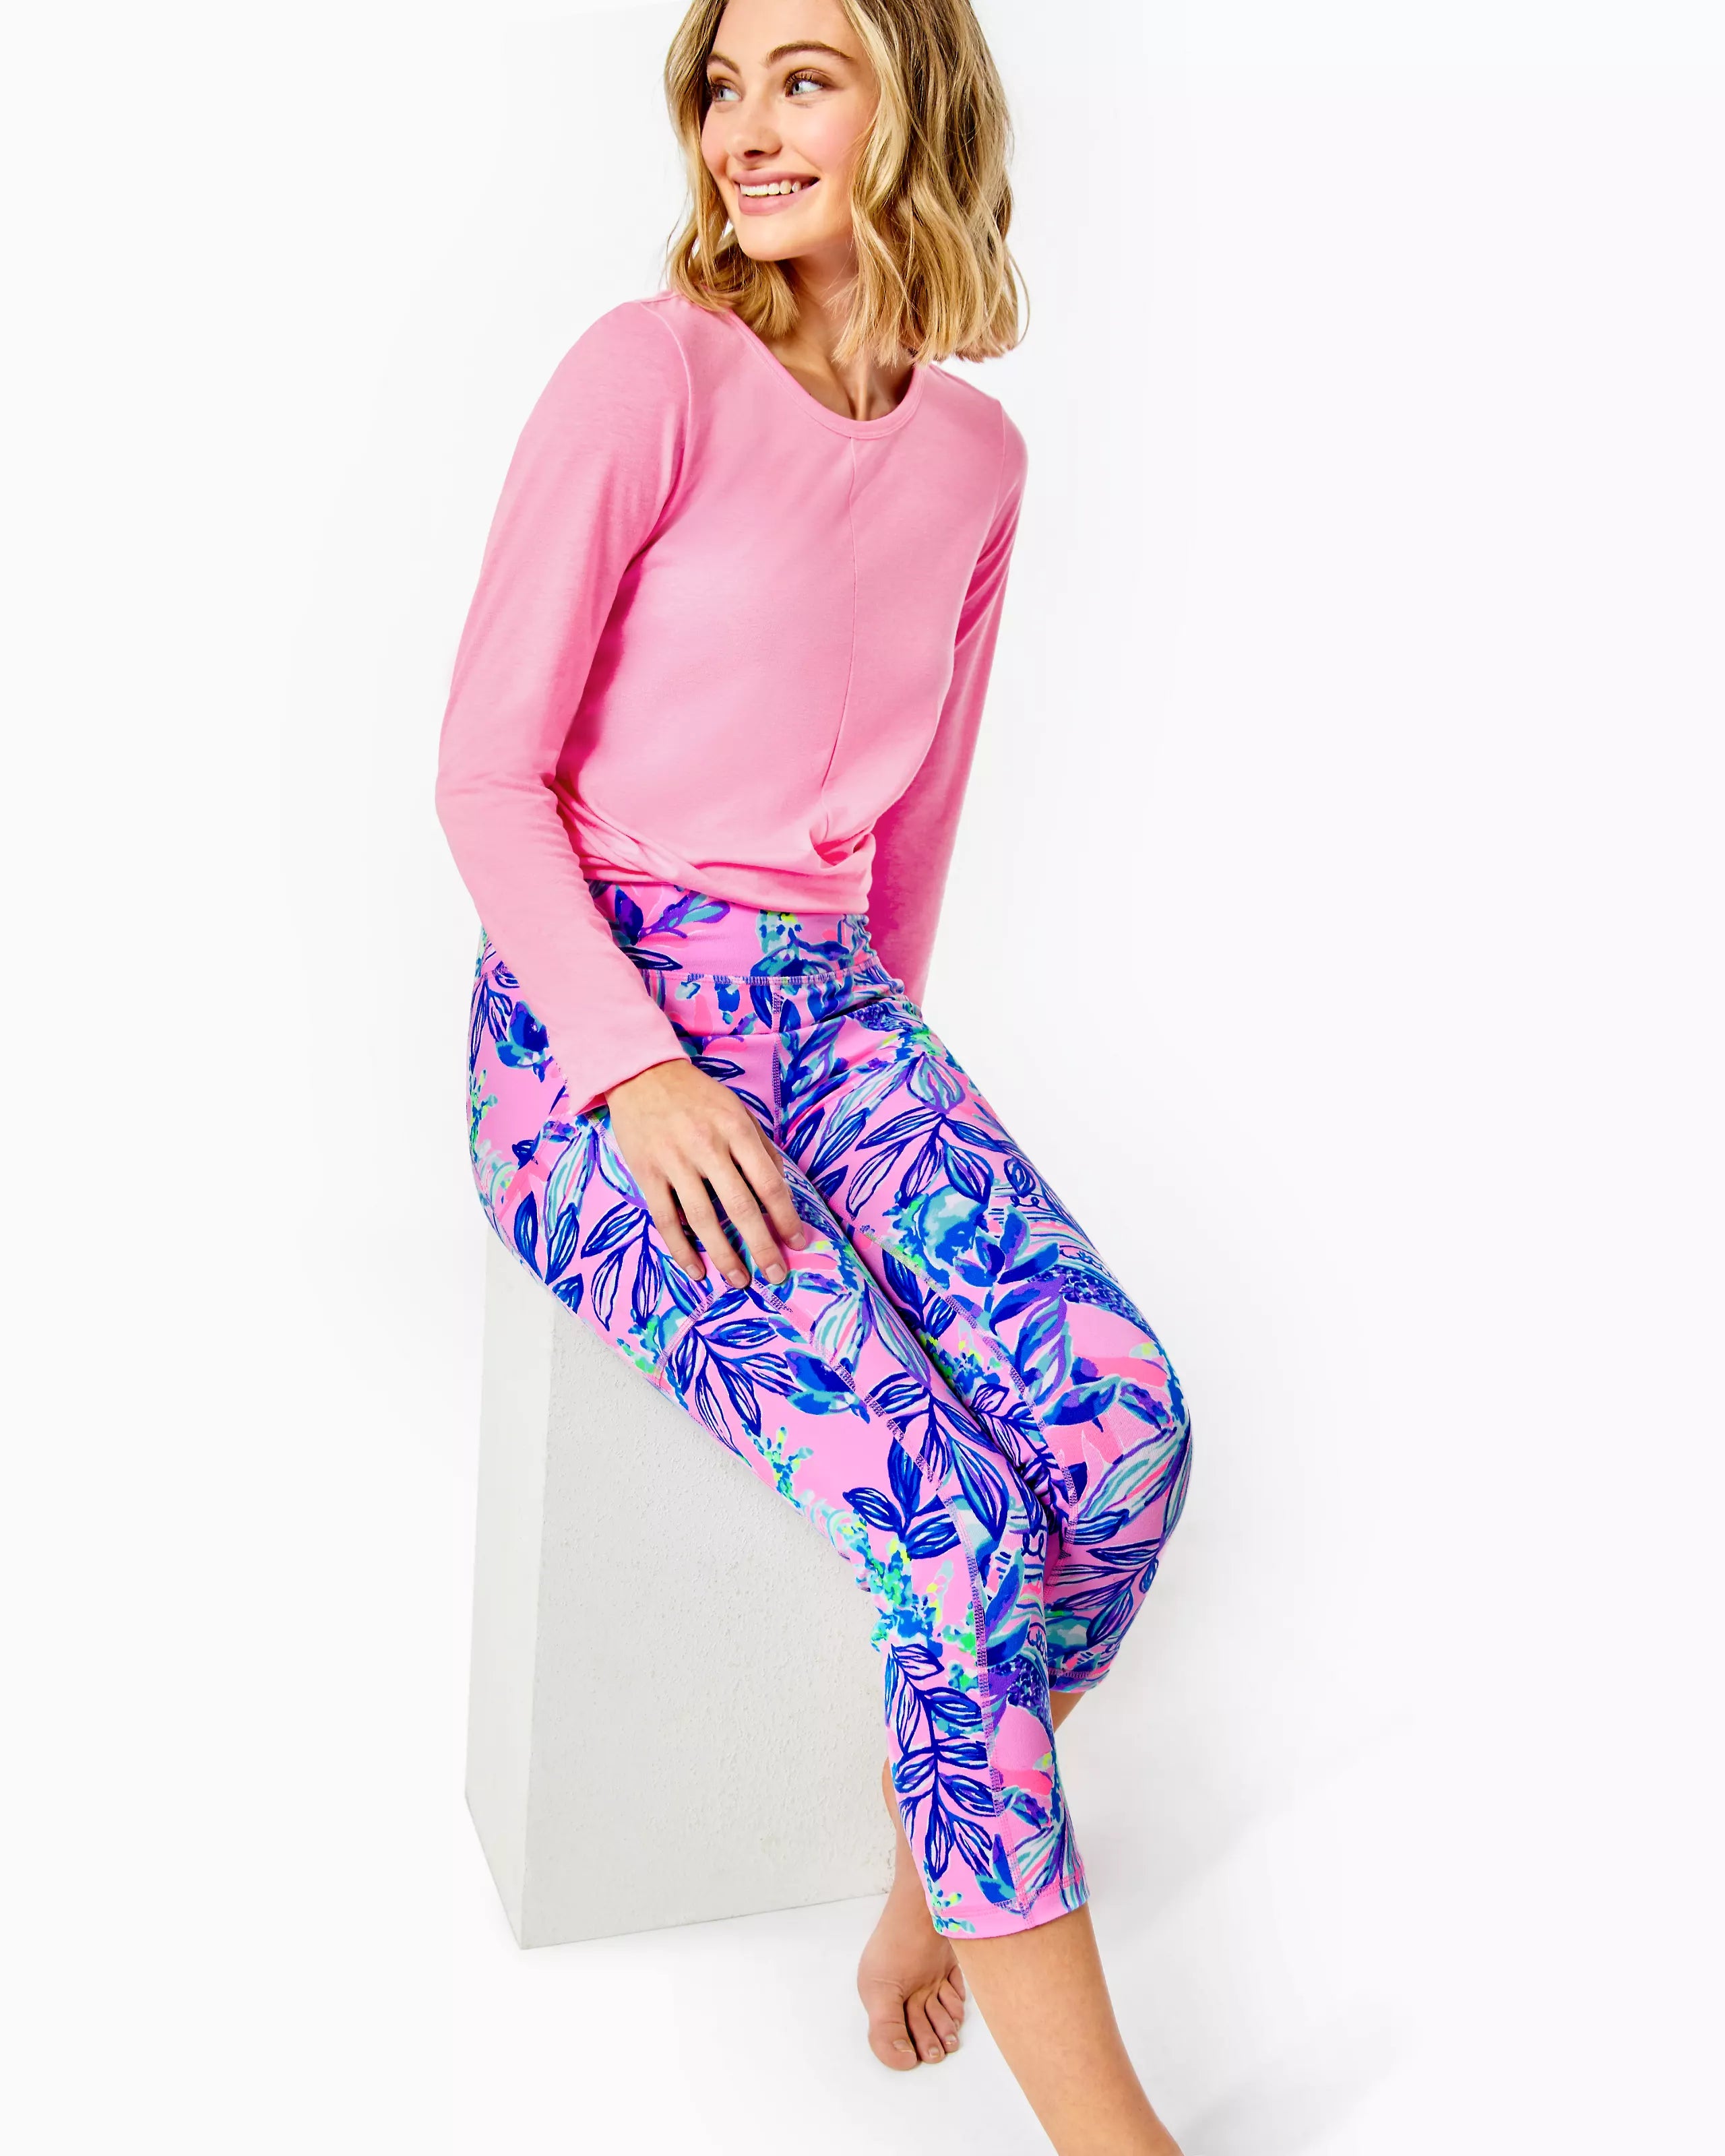 NWT Lilly Pulitzer Luxletic 21 Weekender Leggings Fished My Wish XS